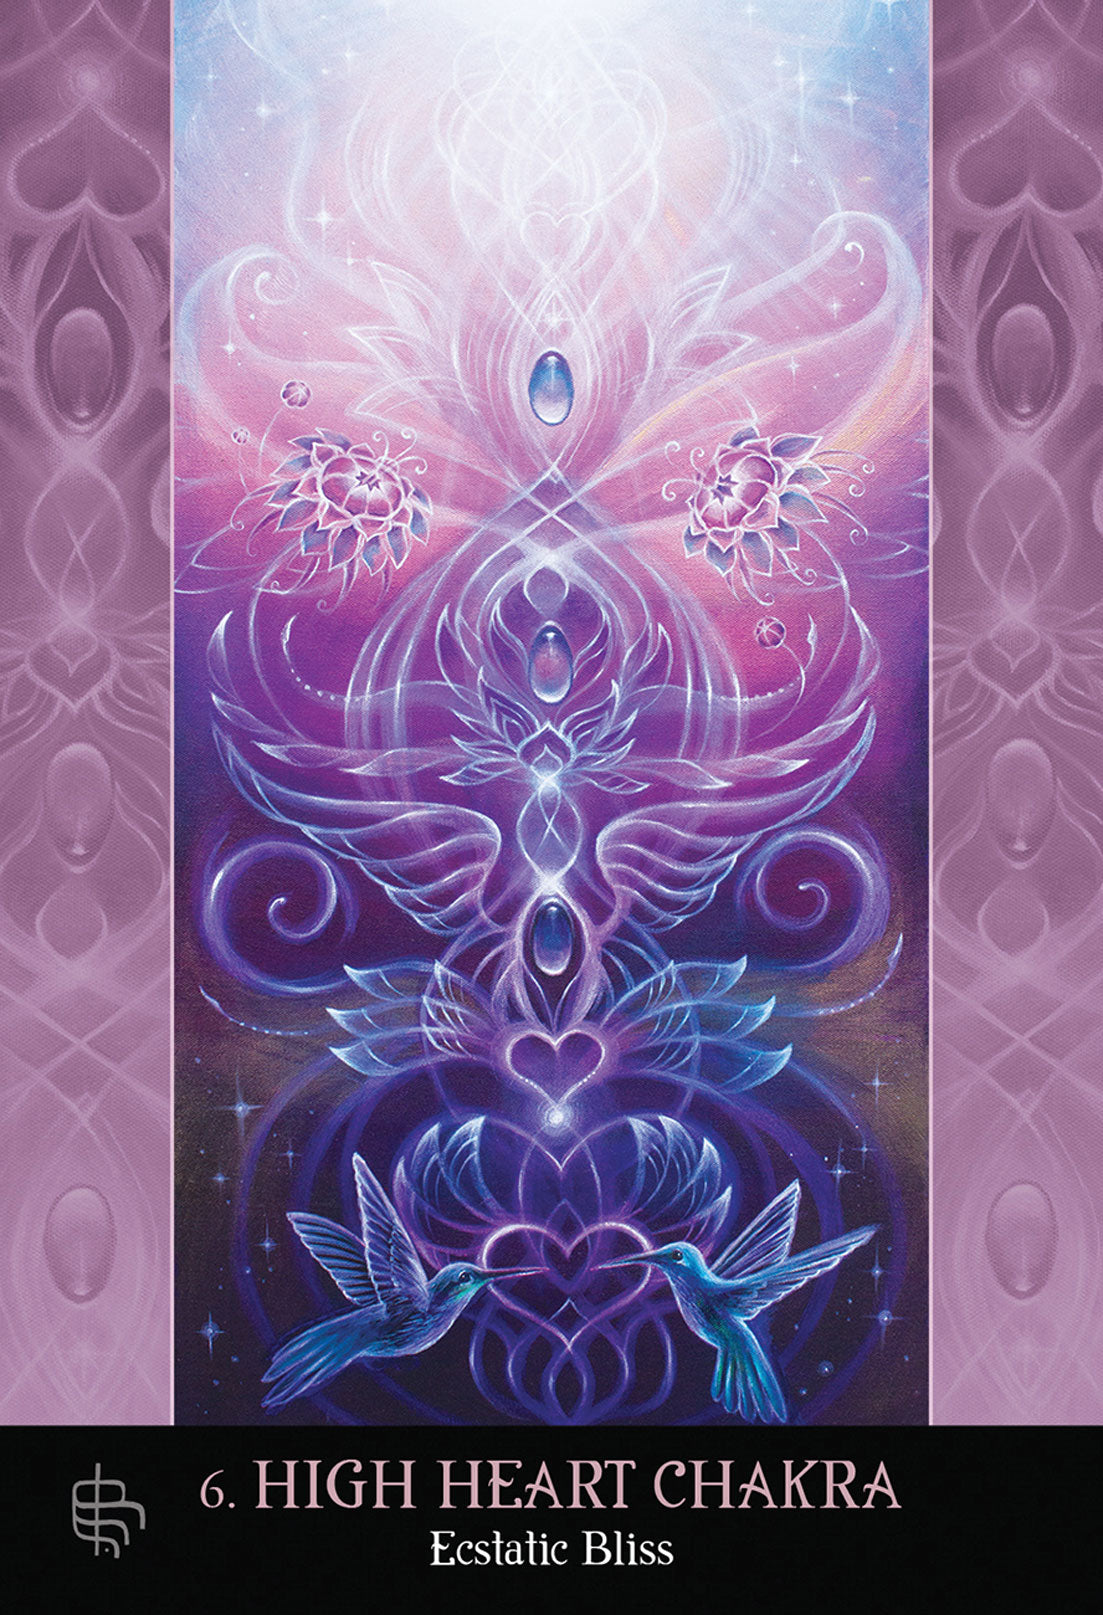 Card labeled "High Heart Chakra - Ecstatic Bliss." Card depicts a series of floral images representing the seven chakras